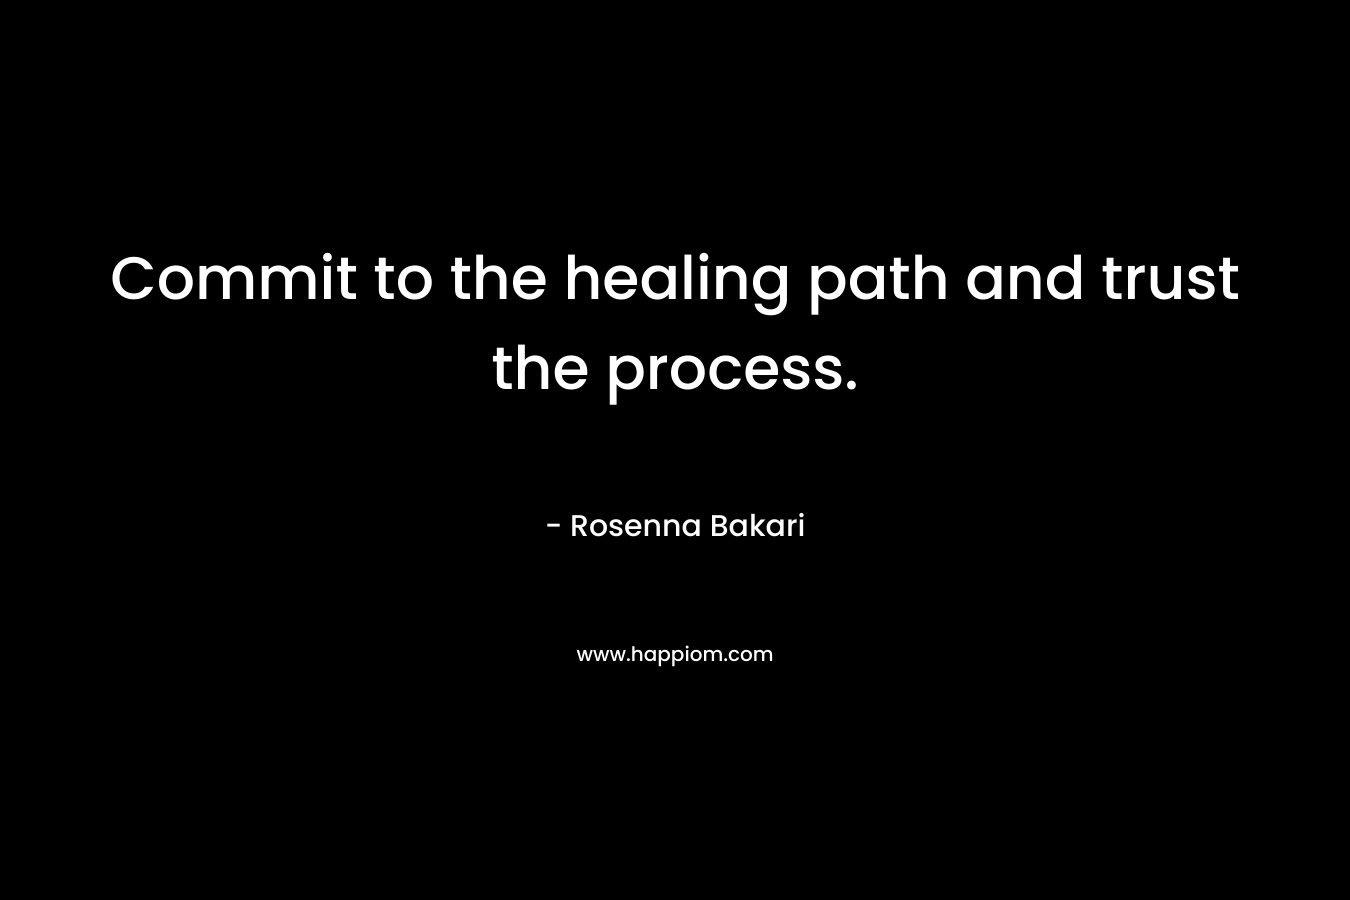 Commit to the healing path and trust the process.